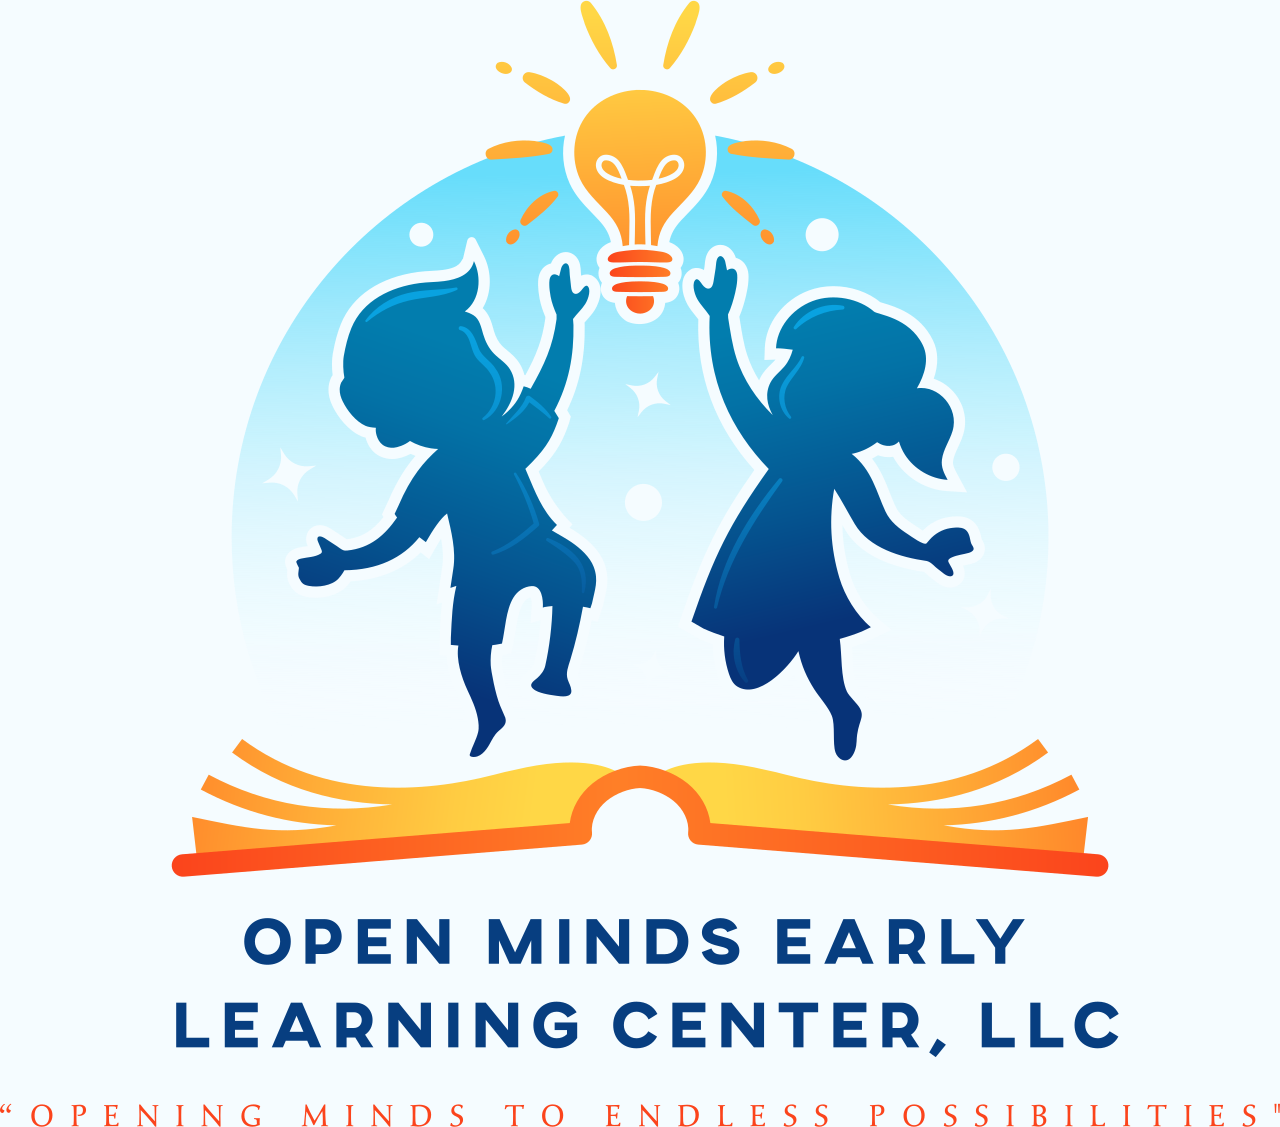 Open Minds Early 
Learning Center, LLC's logo